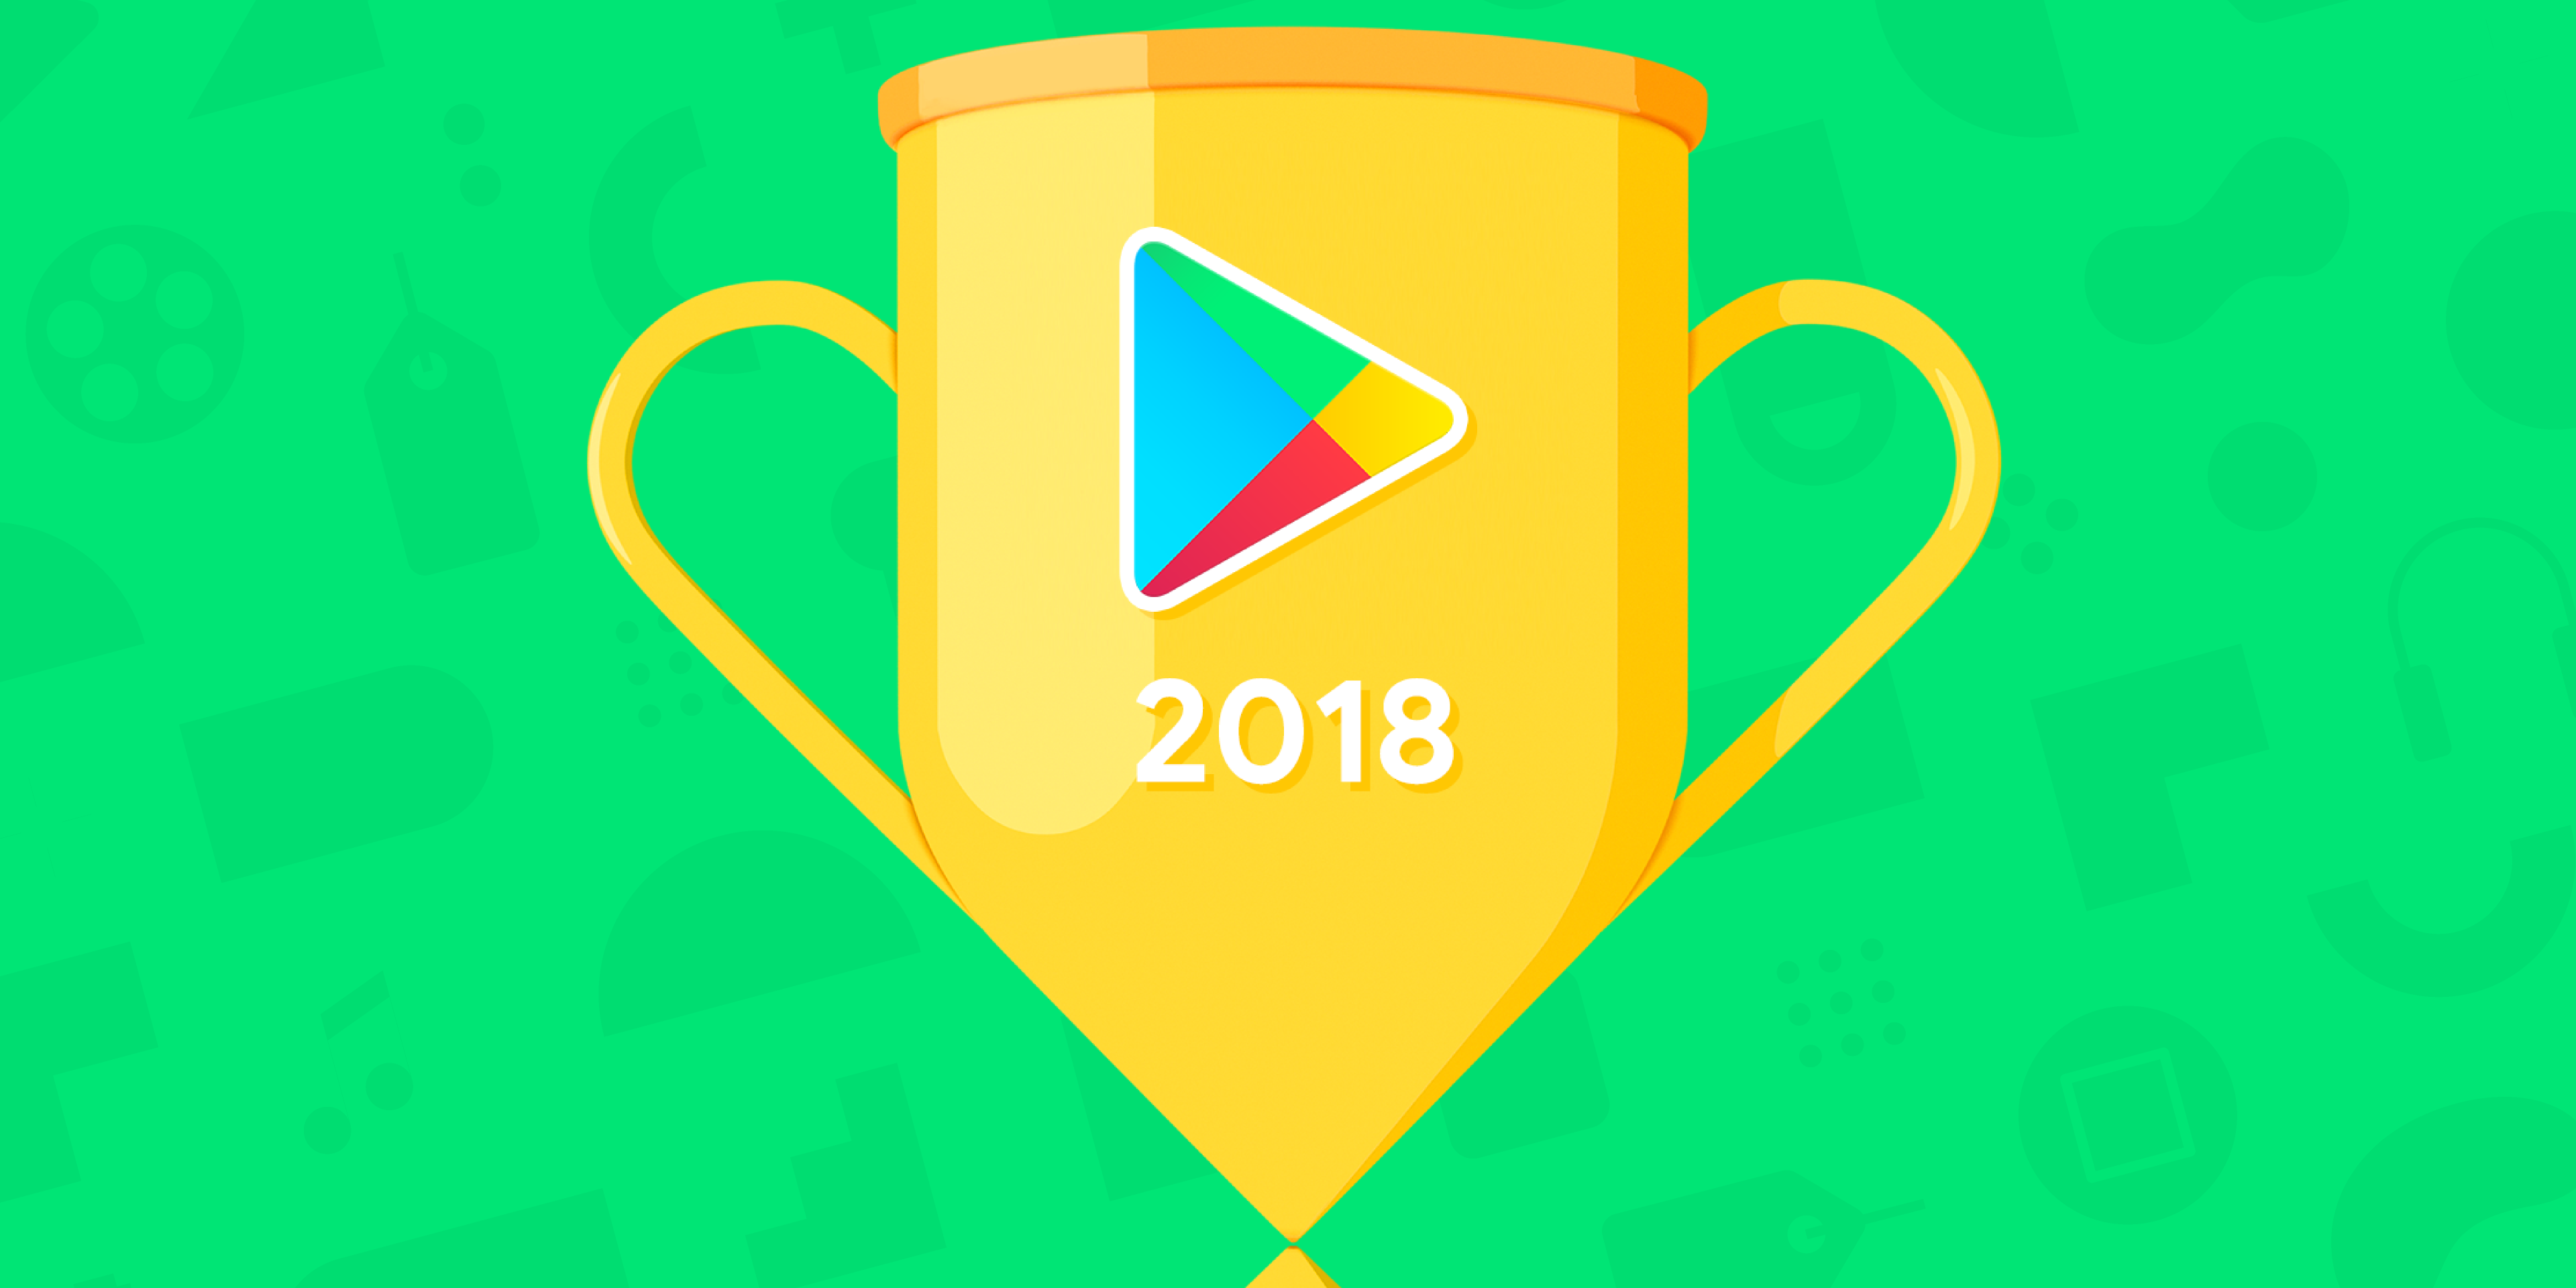 Google Play Best of 2018 Awards reveal 